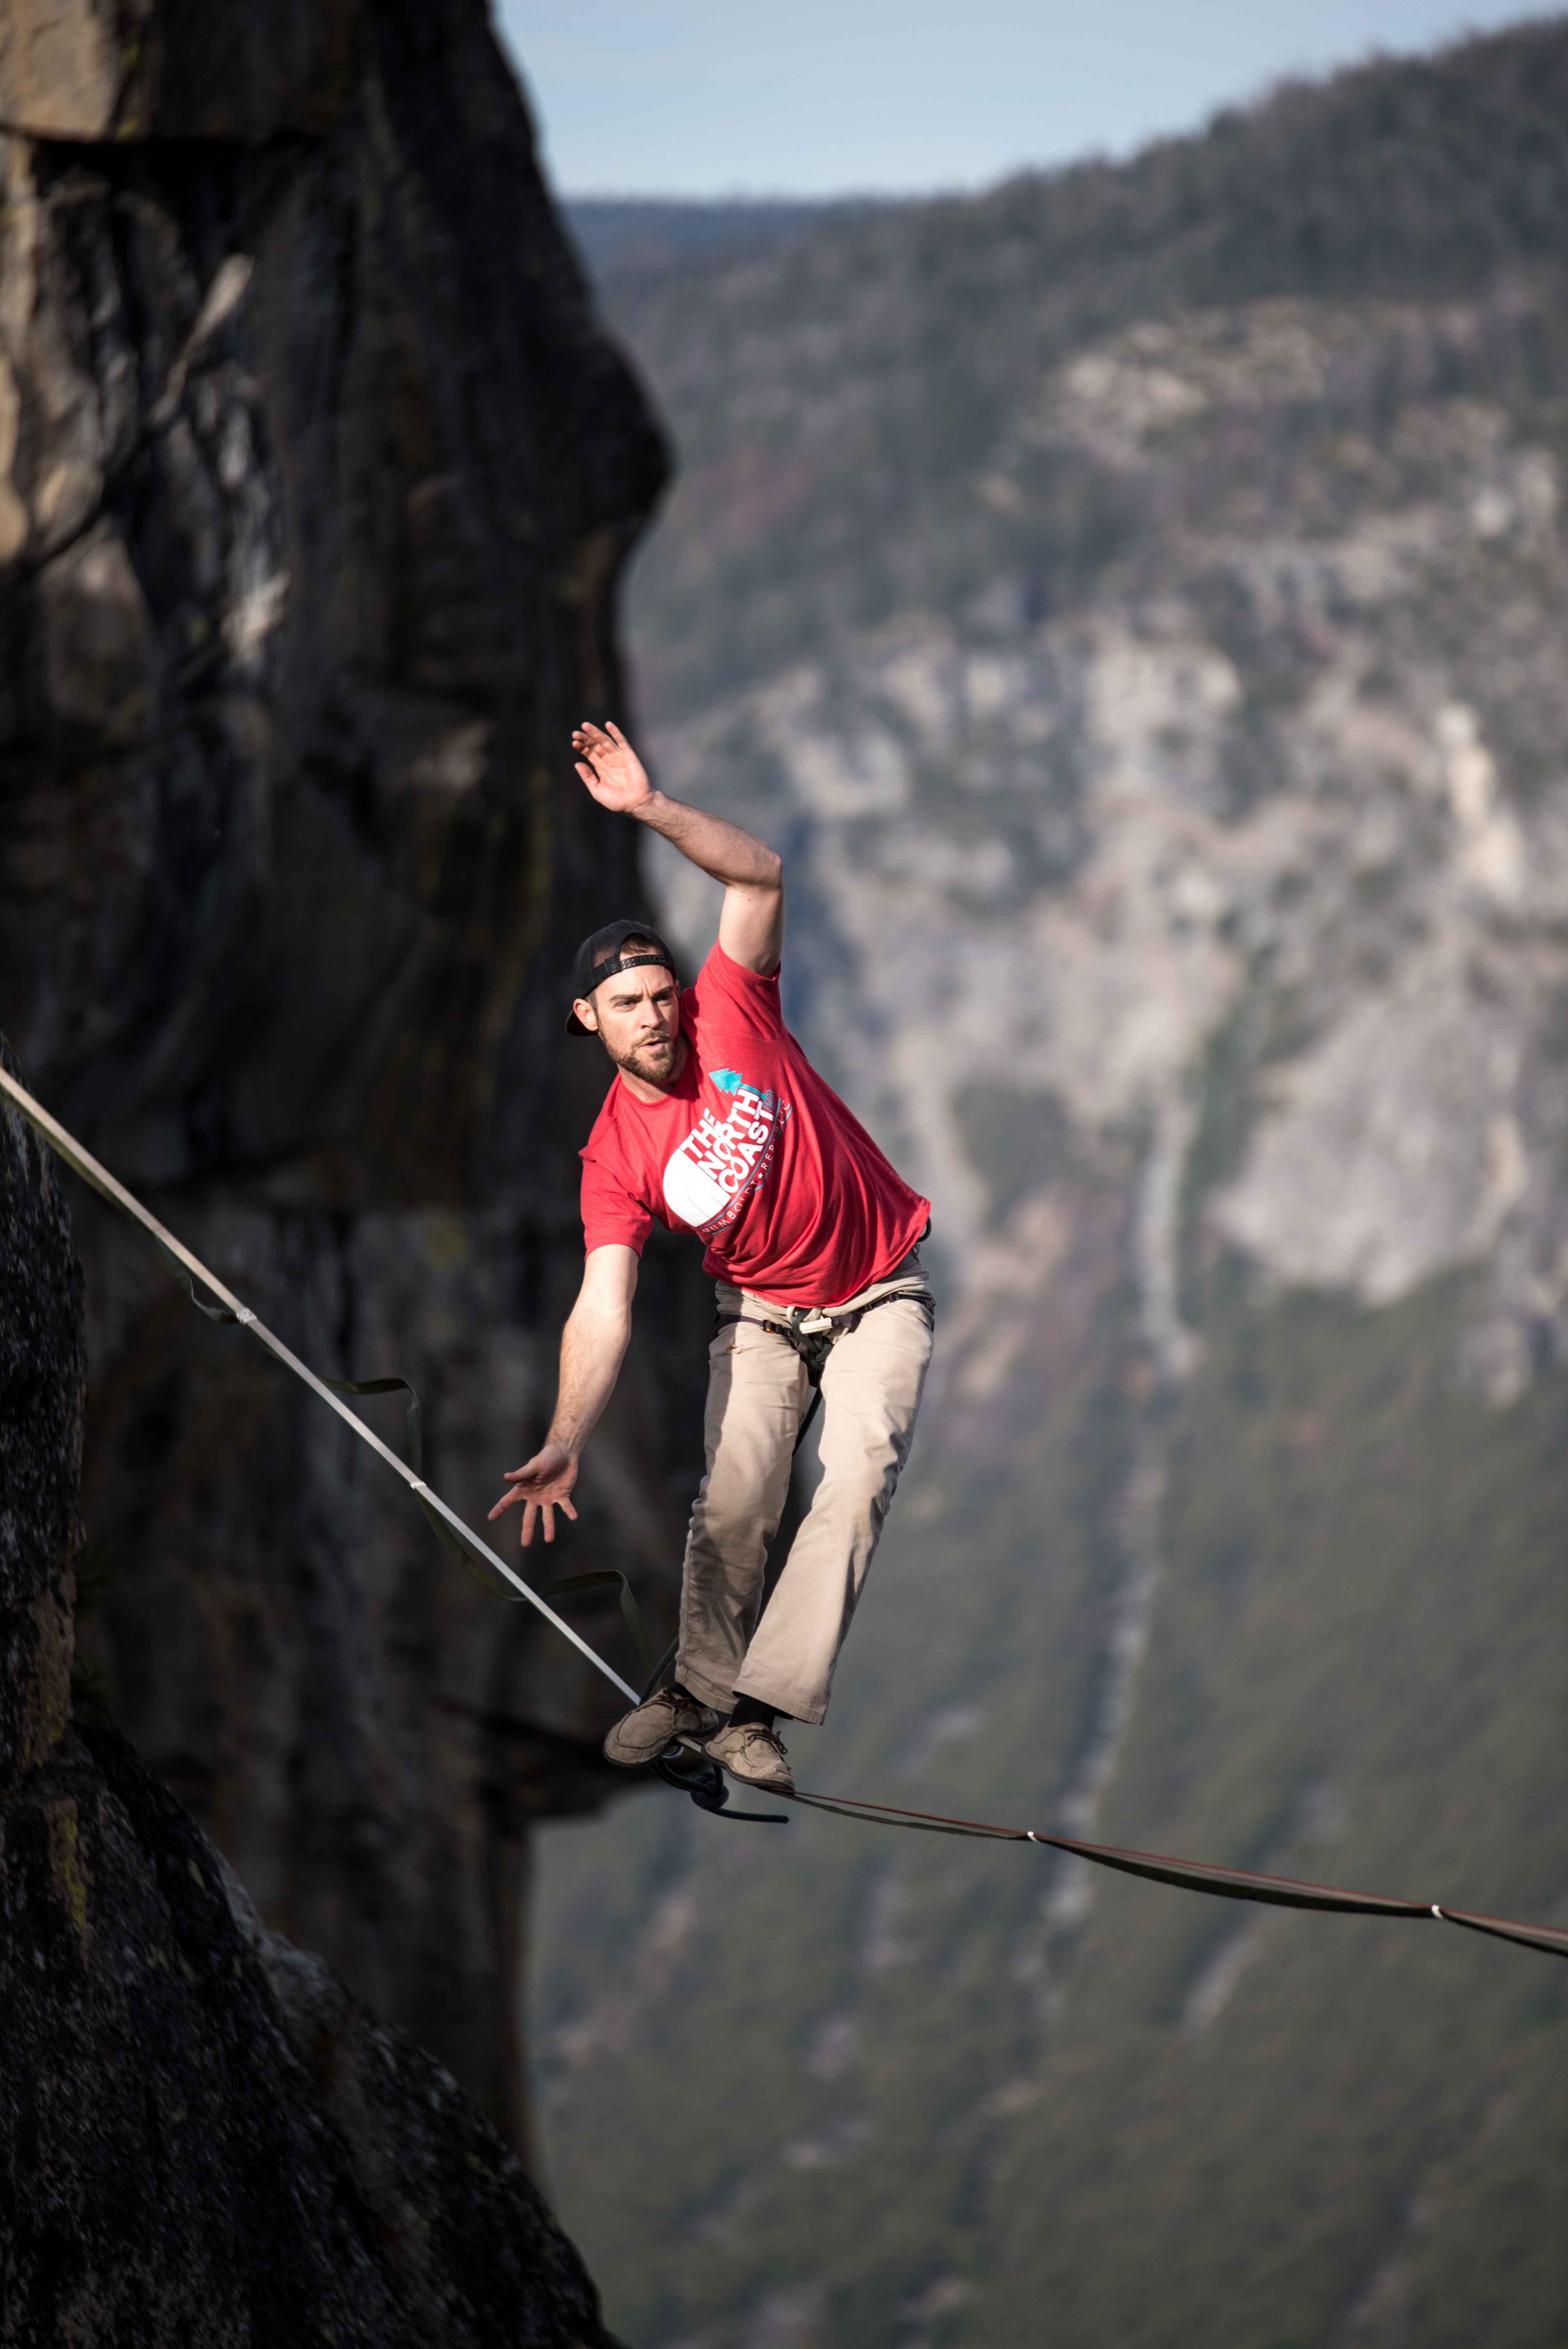 Walking the Tightrope: Balancing Decisions as an Early-stage Product Manager or Founder